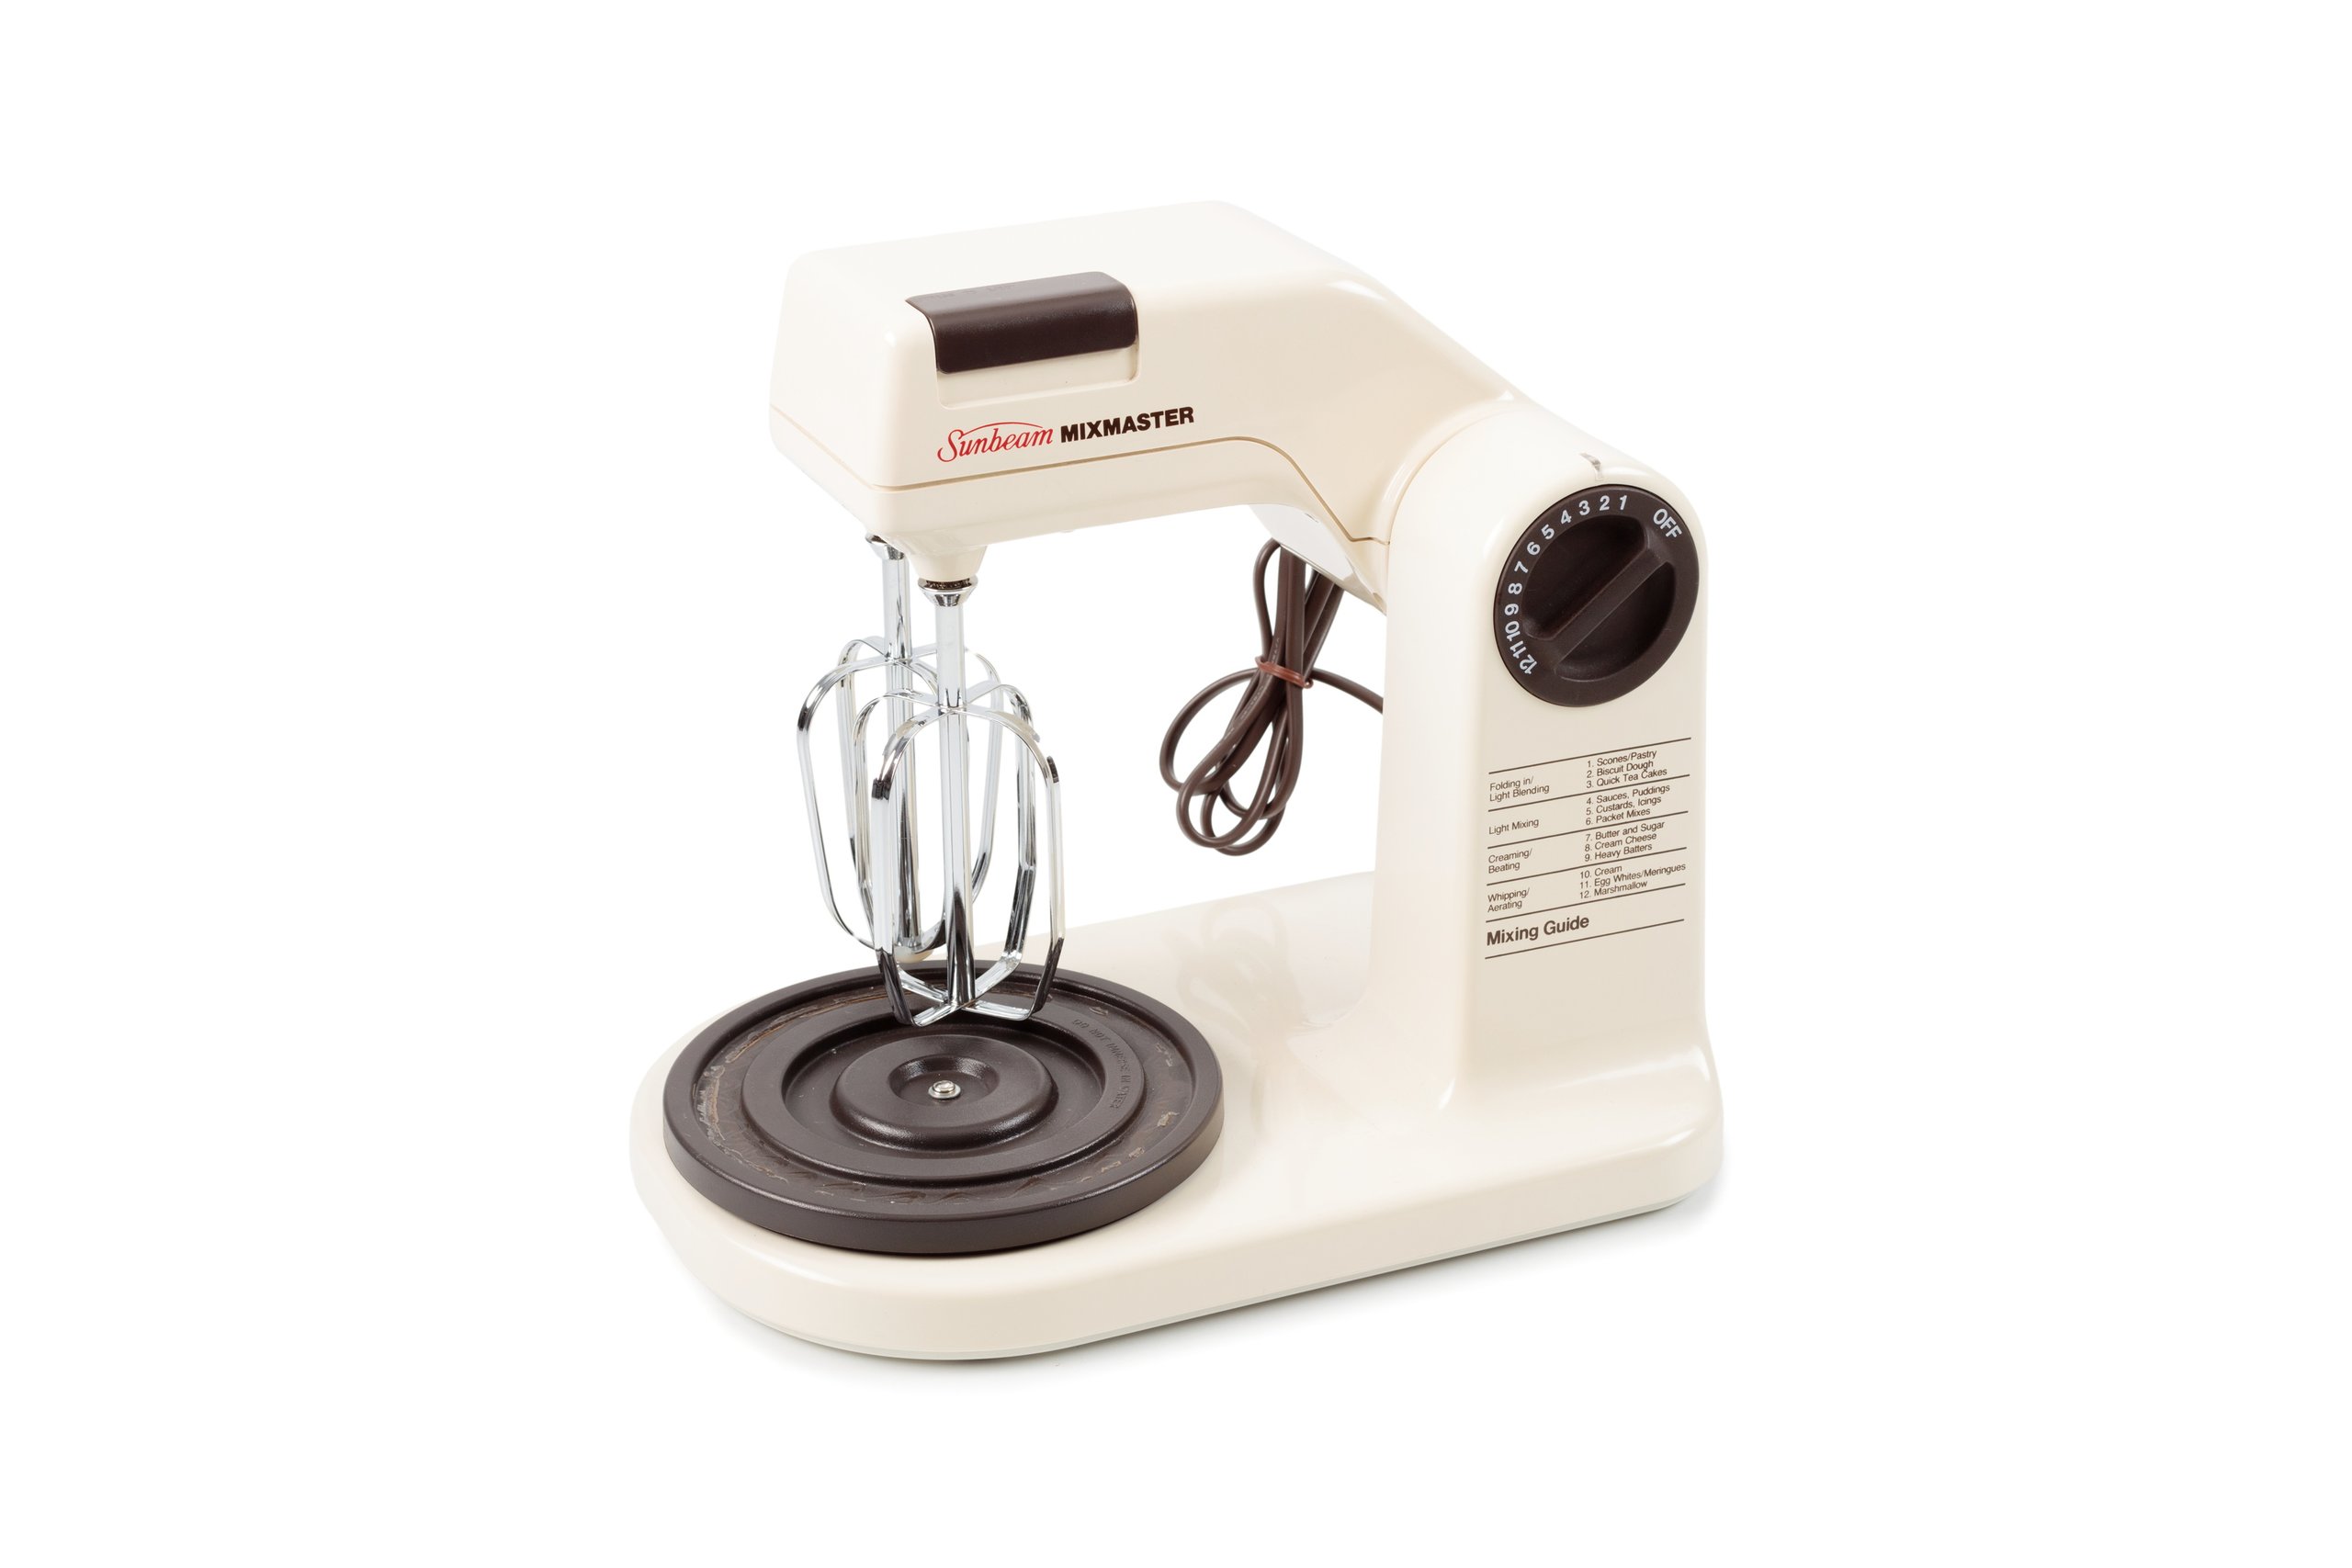 'Mixmaster' electric food mixer made by Sunbeam